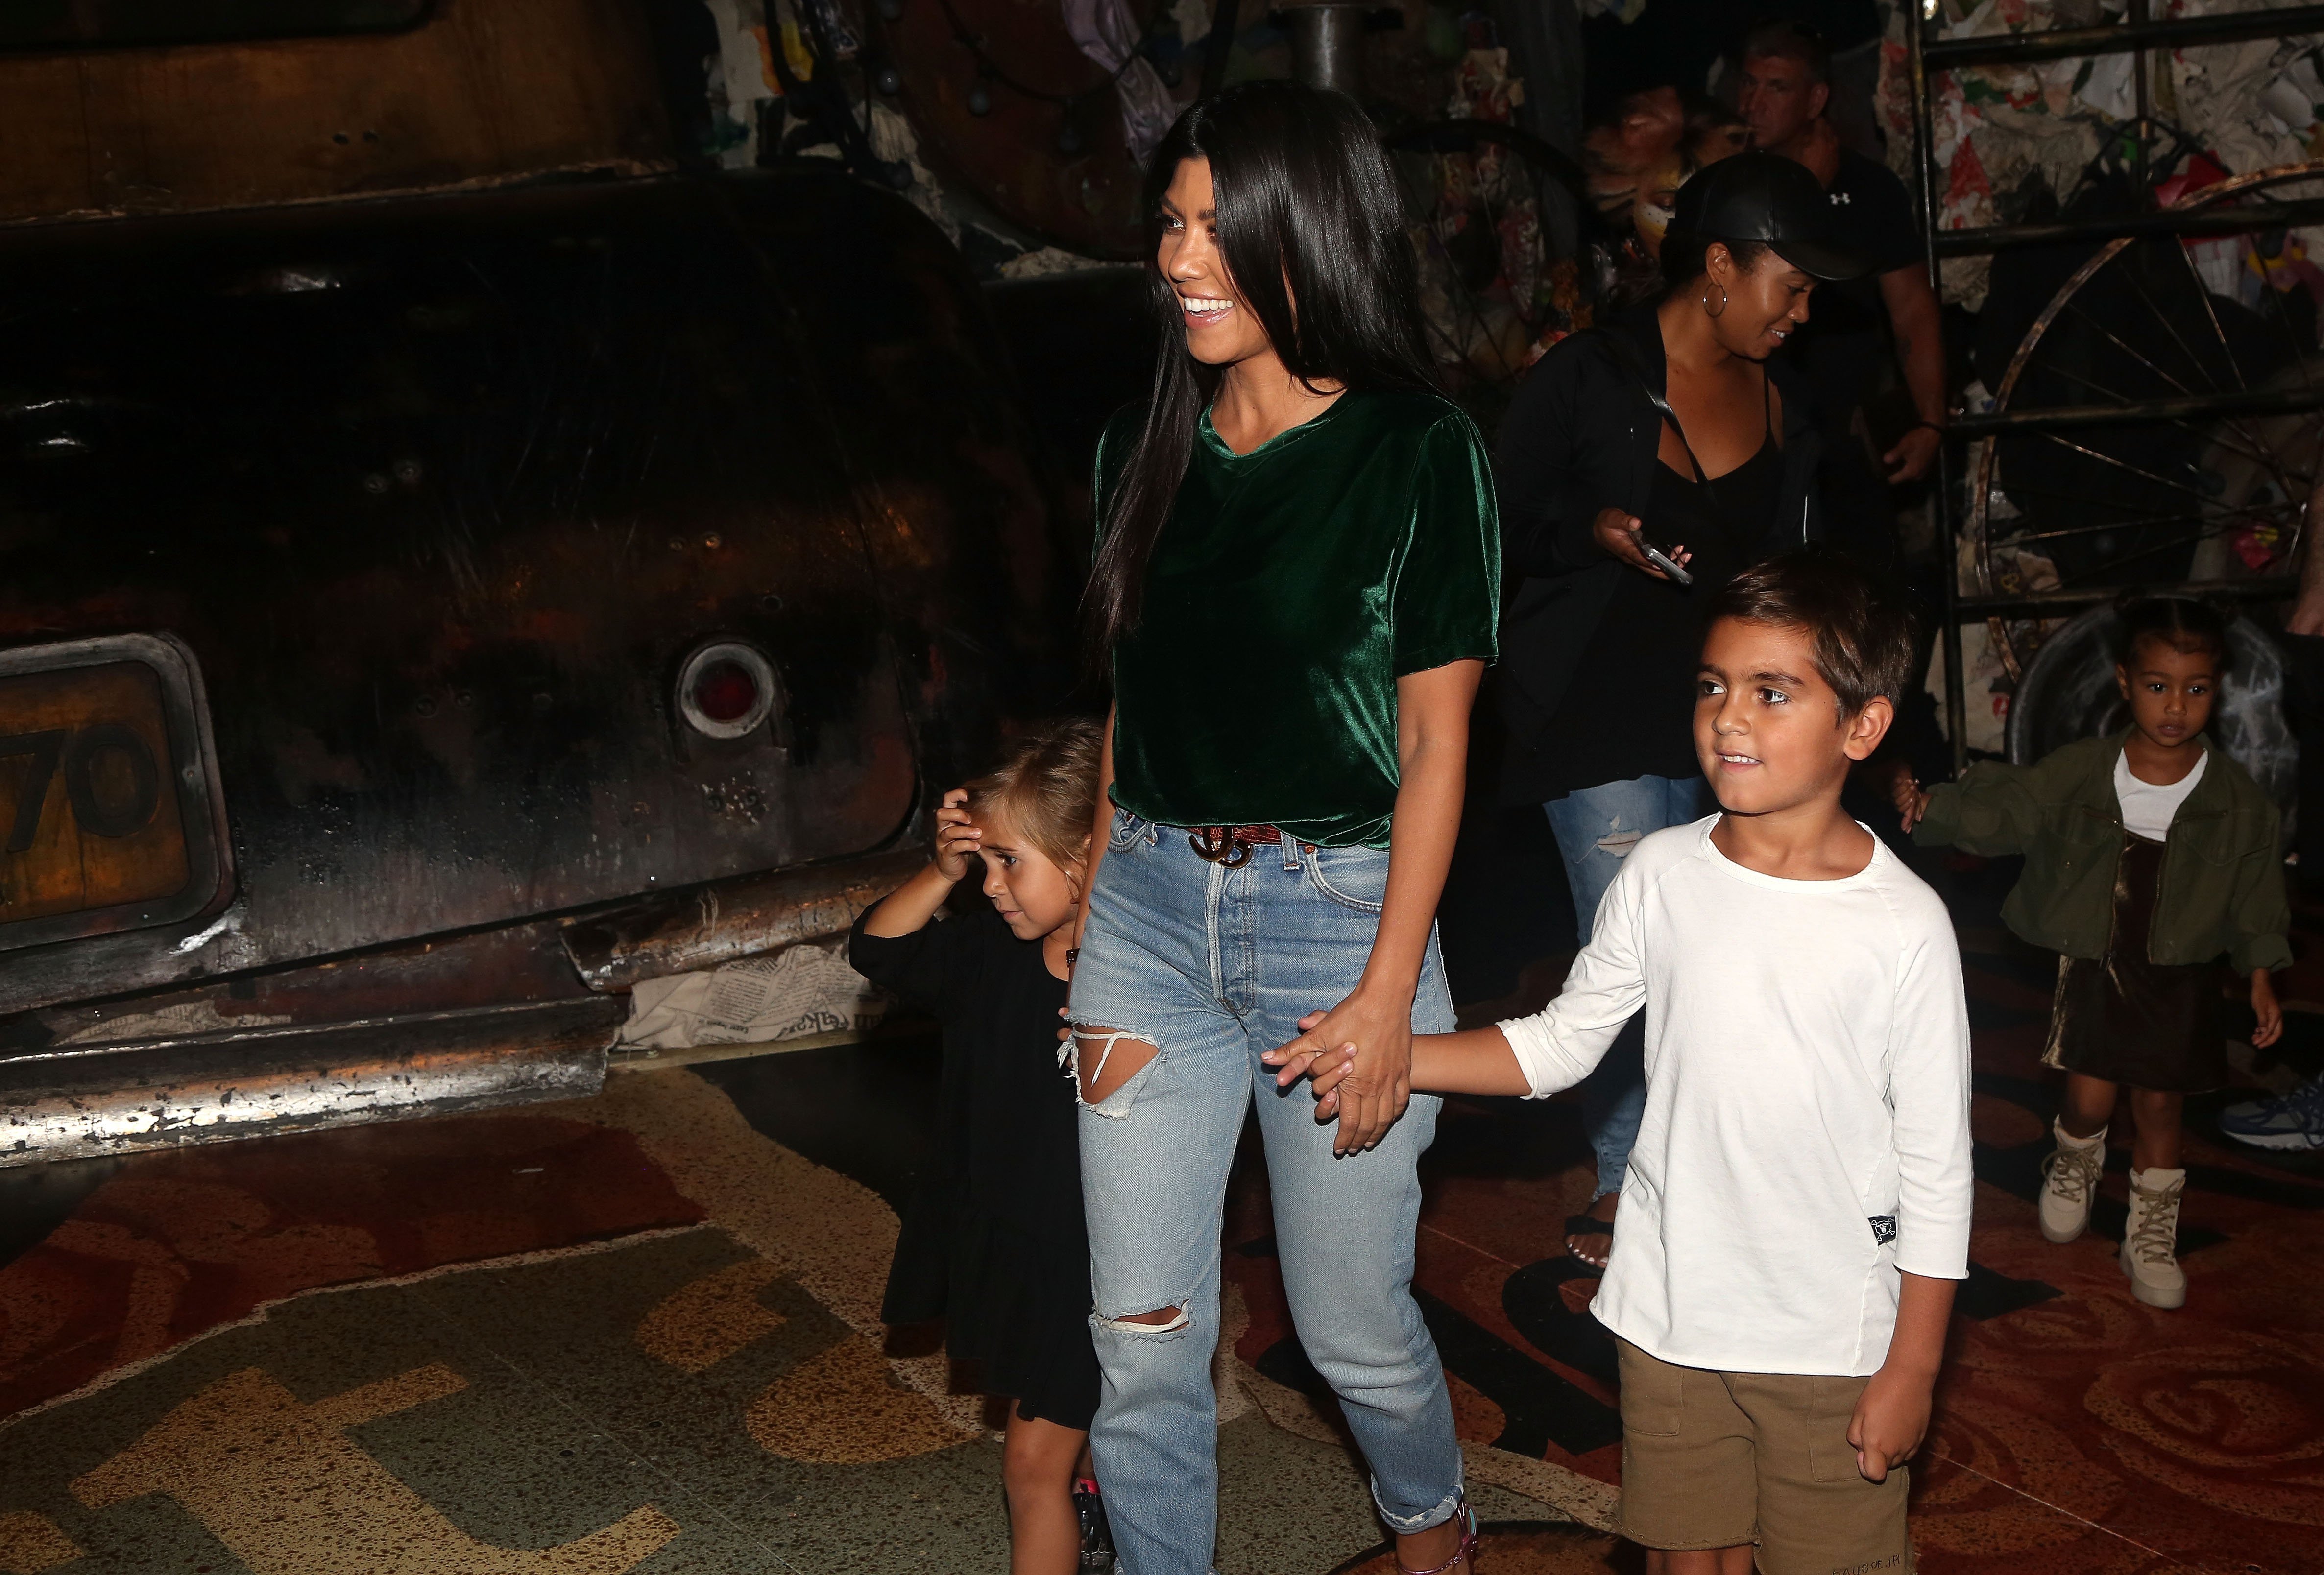 Kourtney Kardashian holds children Mason and Penelope Disick's hands at "Cats" Broadway show in New York City in September 2016. | Photo: Getty Images